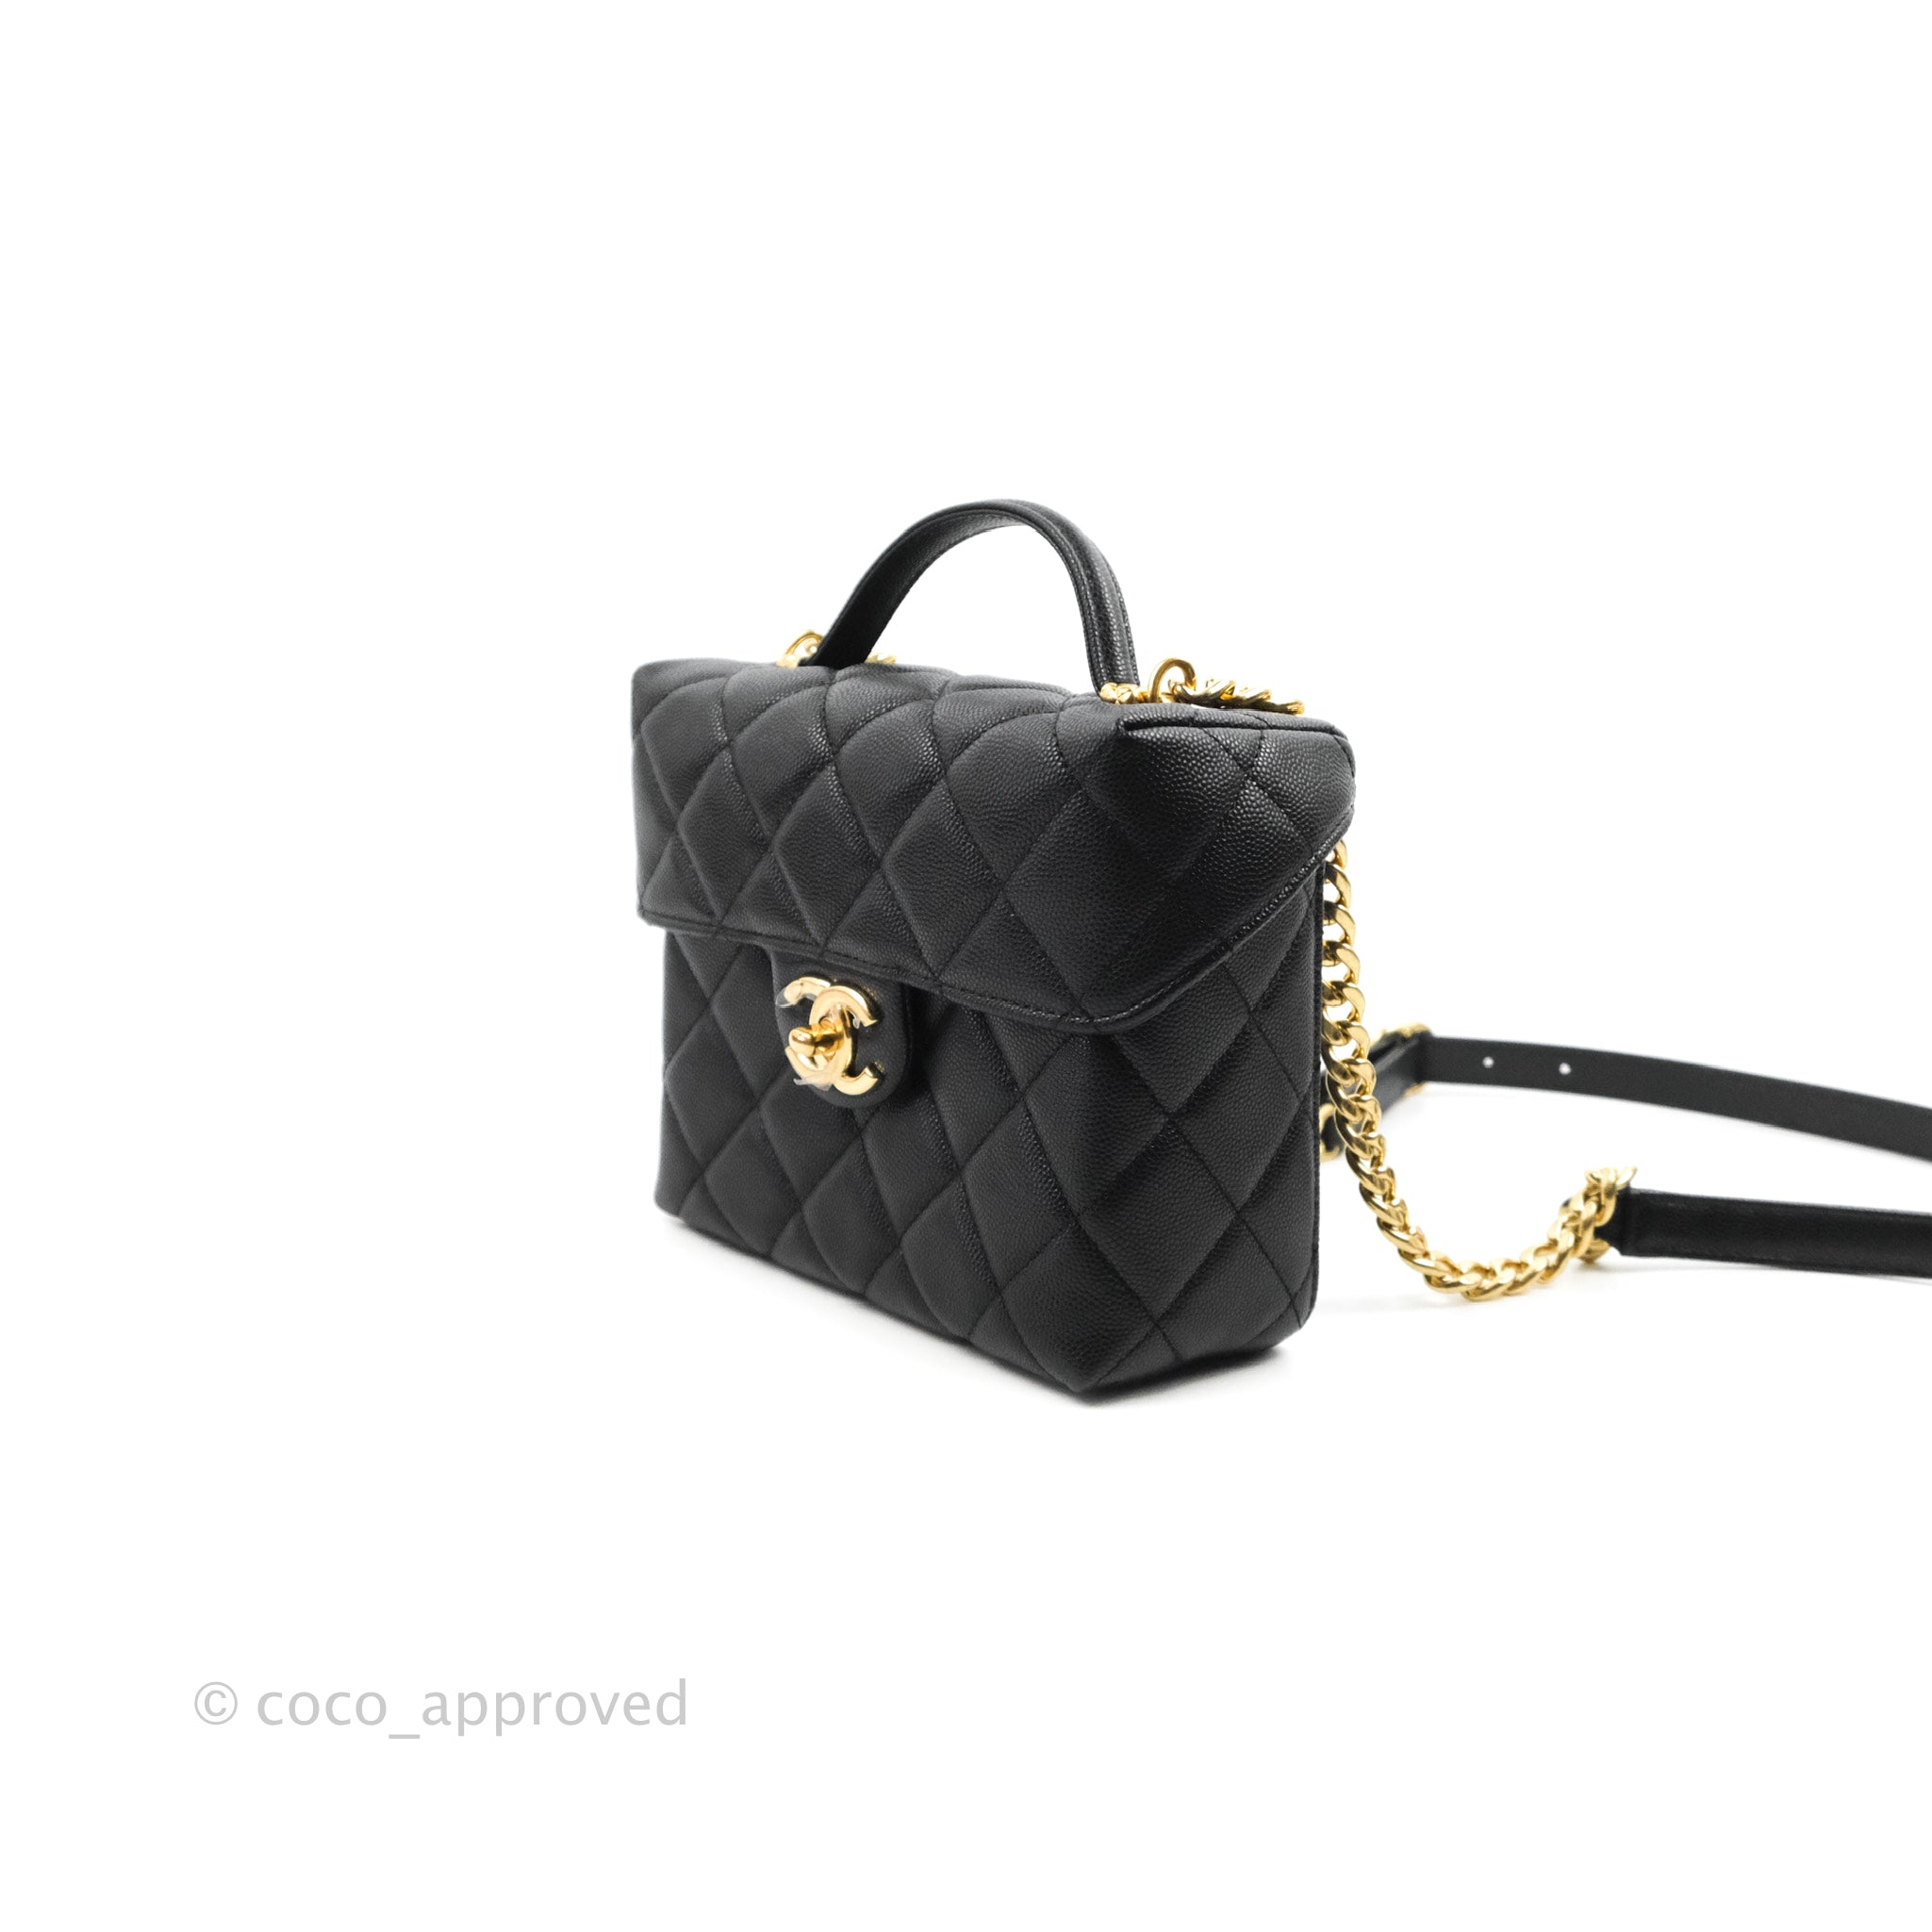 New 23S CHANEL Classic Top Handle Flap Black Caviar Leather Gold Hwr Small  Bag